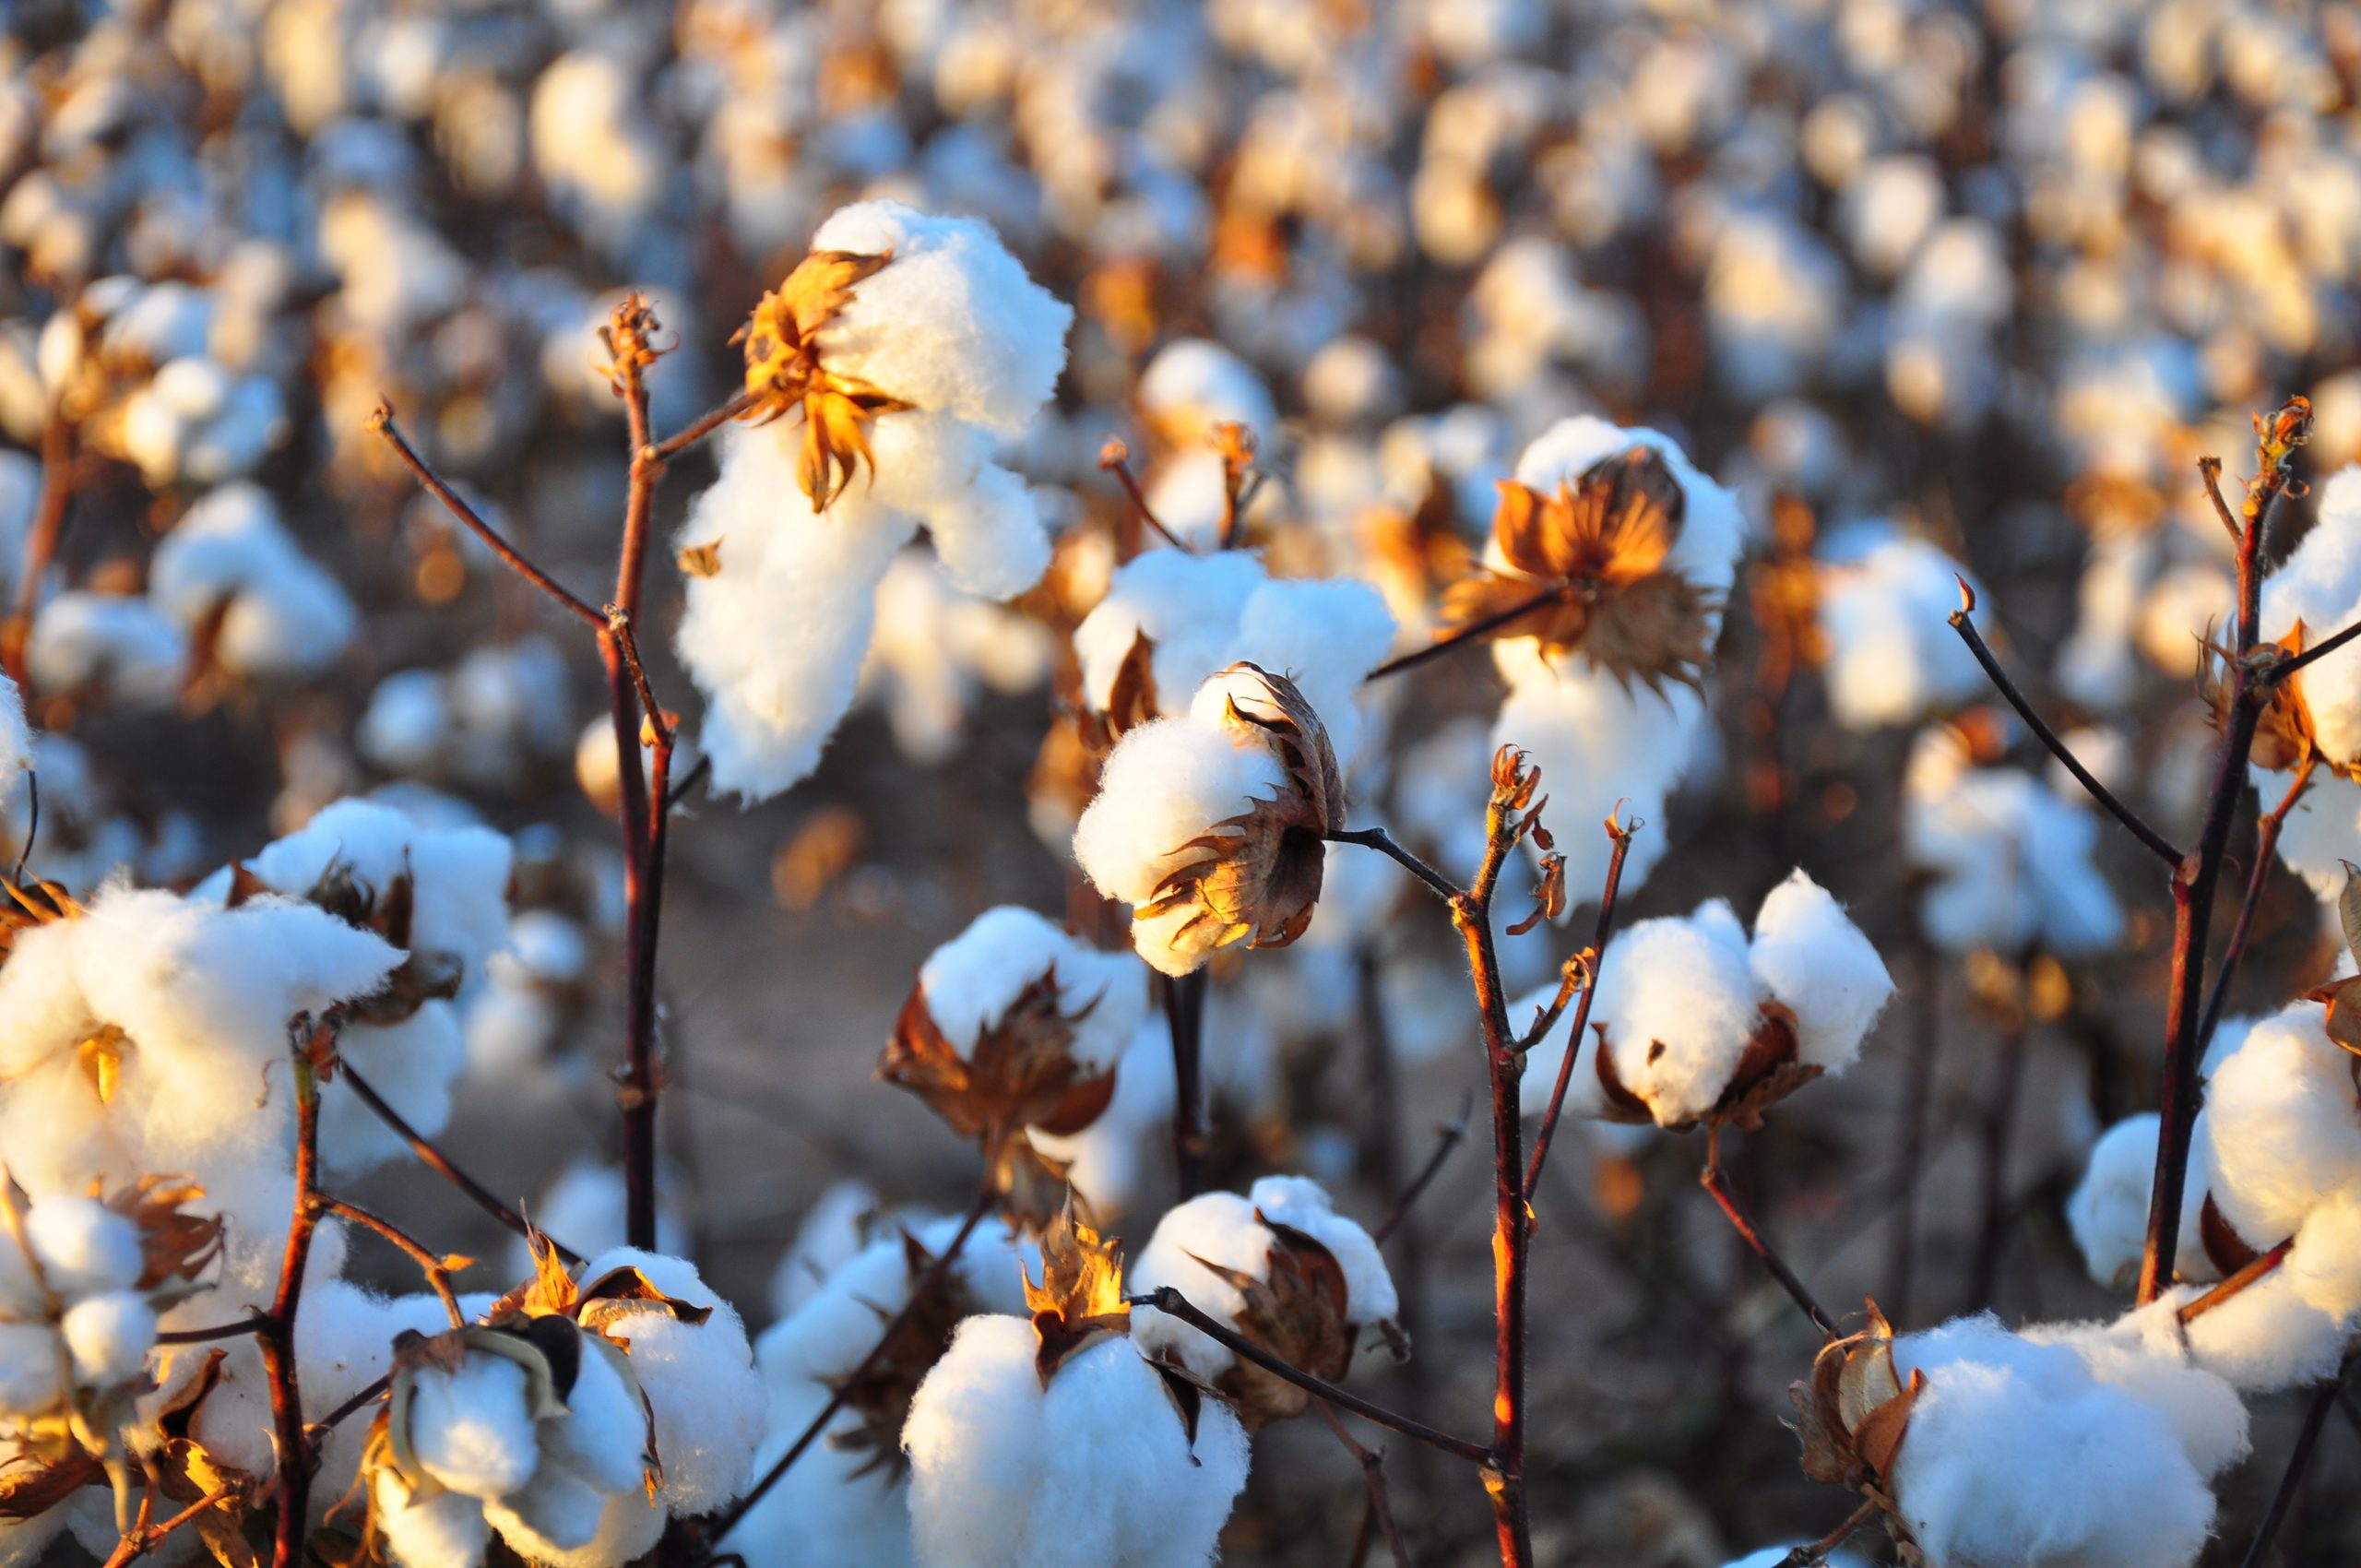 INDIA WILL CONTINUE TO LEAD THE WORLD IN COTTON PRODUCTION UNTIL 2030